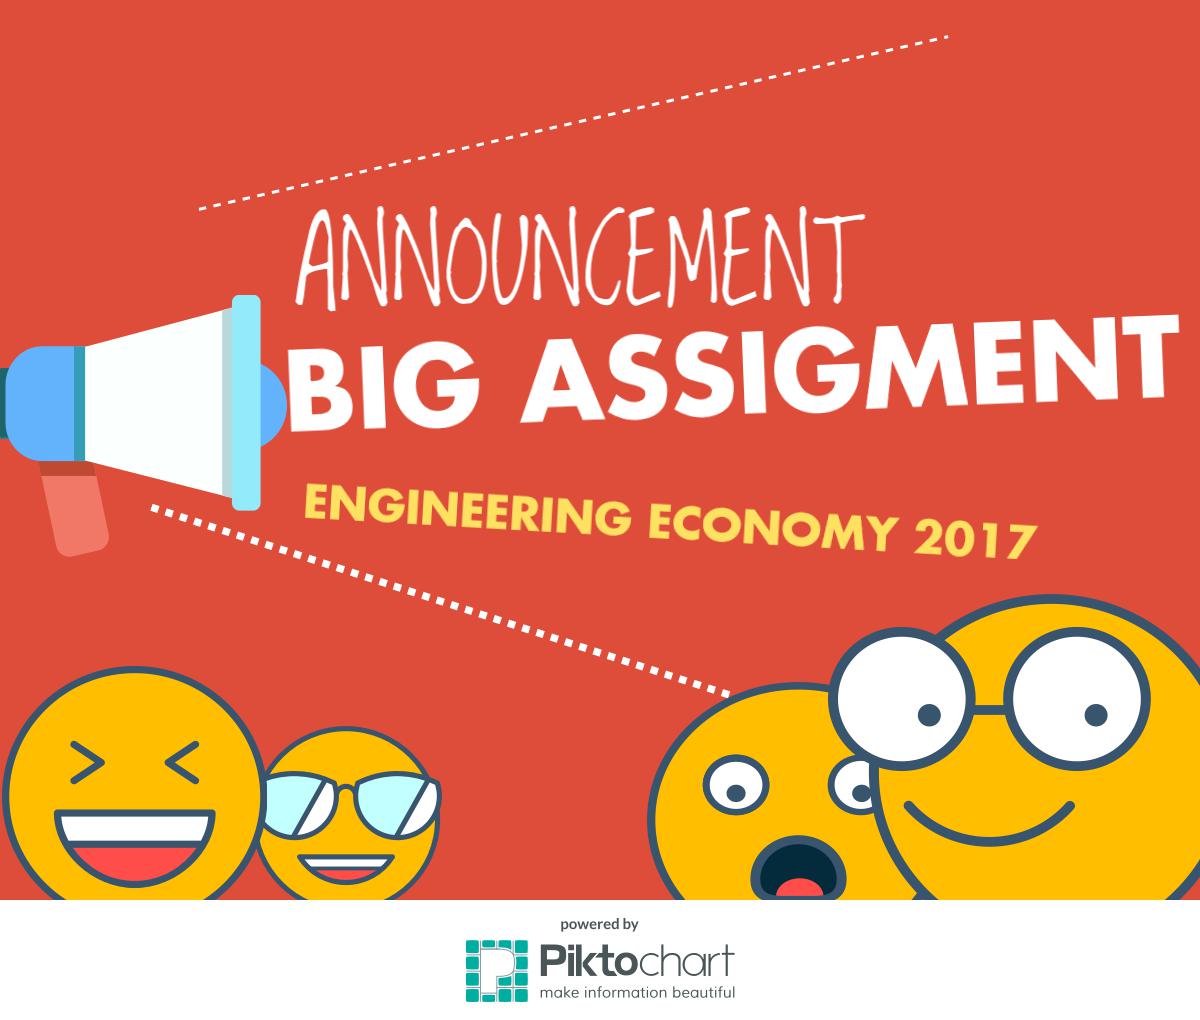 Engineering Economy: Guideline for big assignment! (MUST READ)